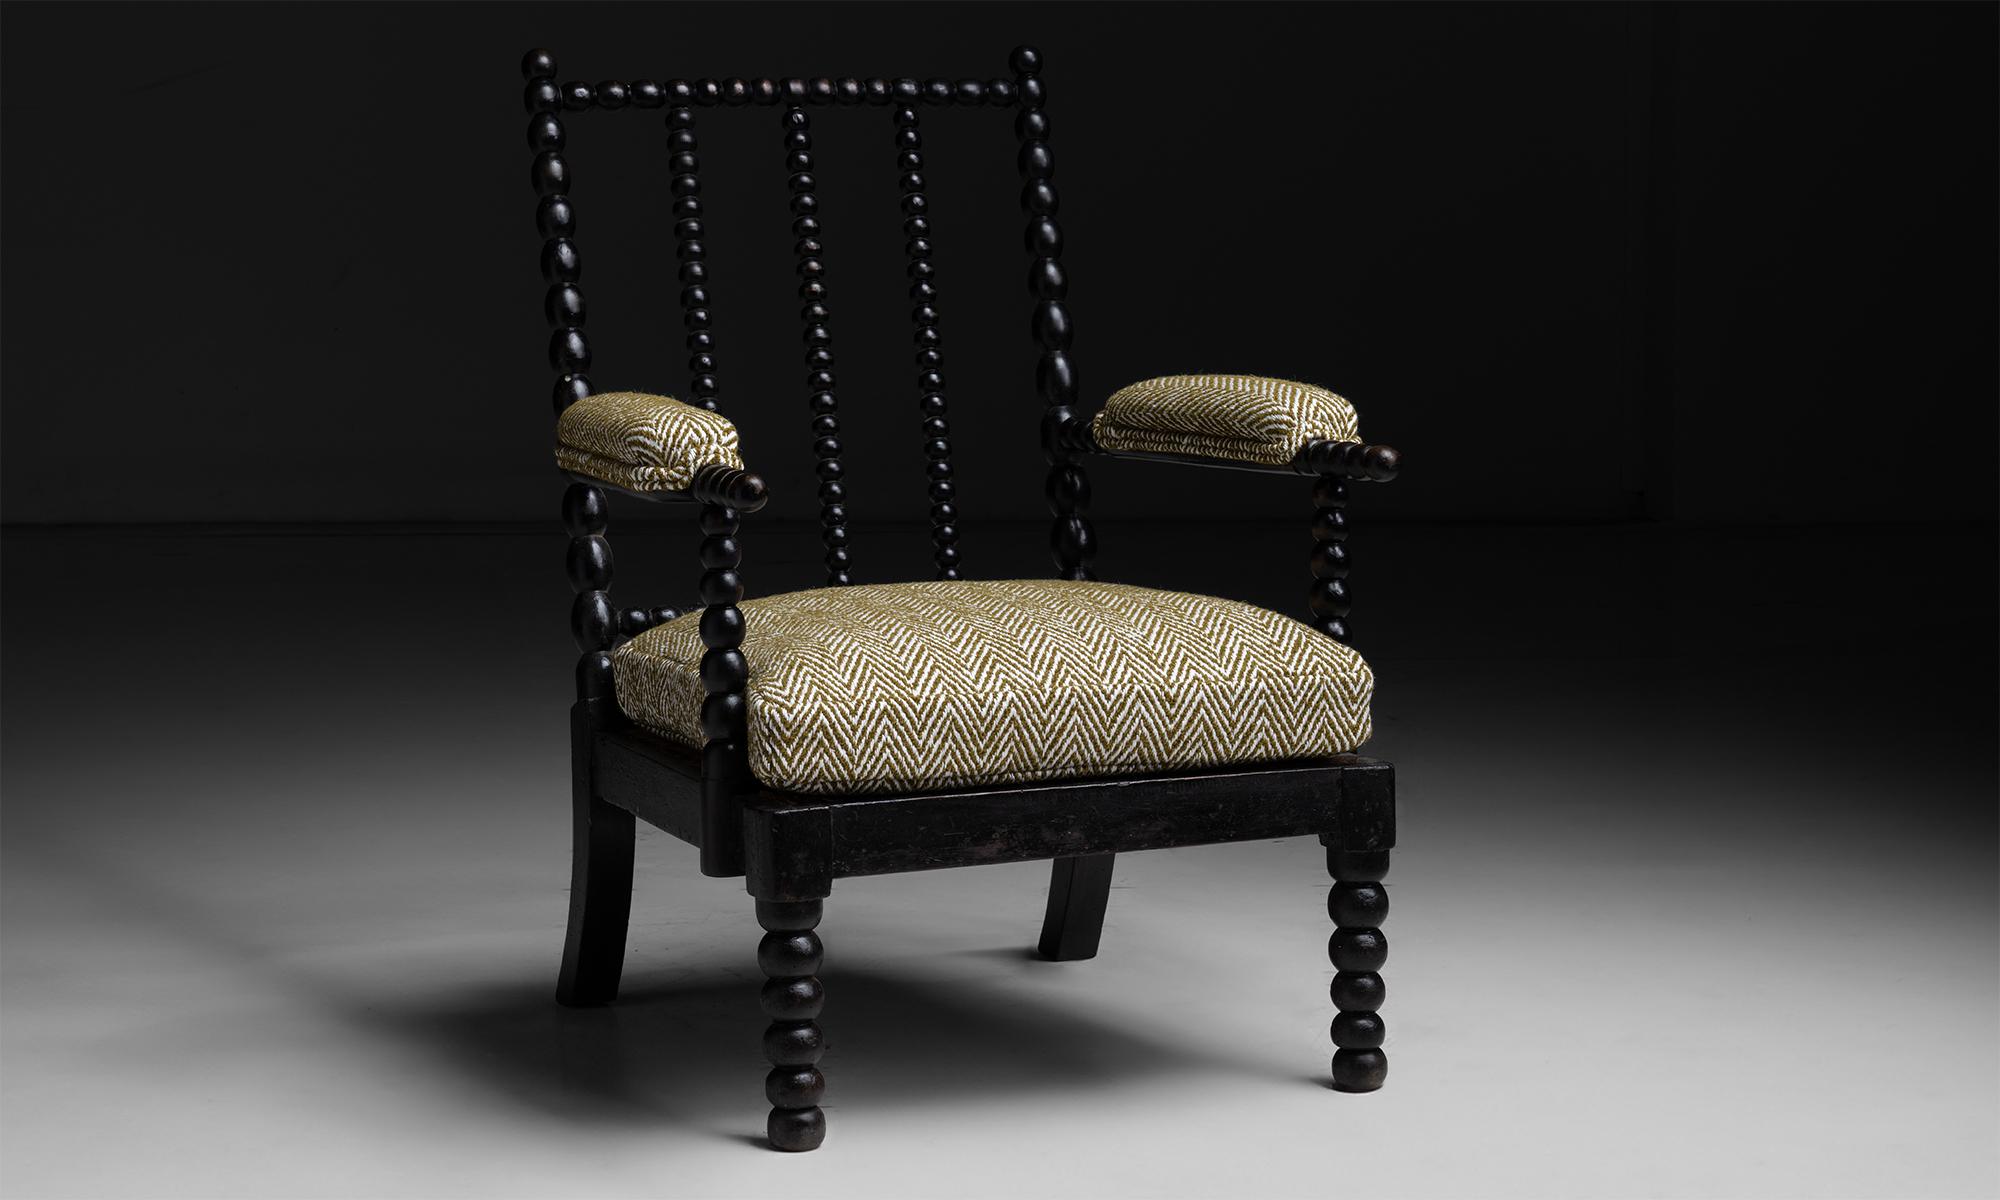 Bobbin Armchair

England circa 1890

Newly upholstered seat and arms in herringbone fabric by De La Cuona, composed of wool and linen.

27